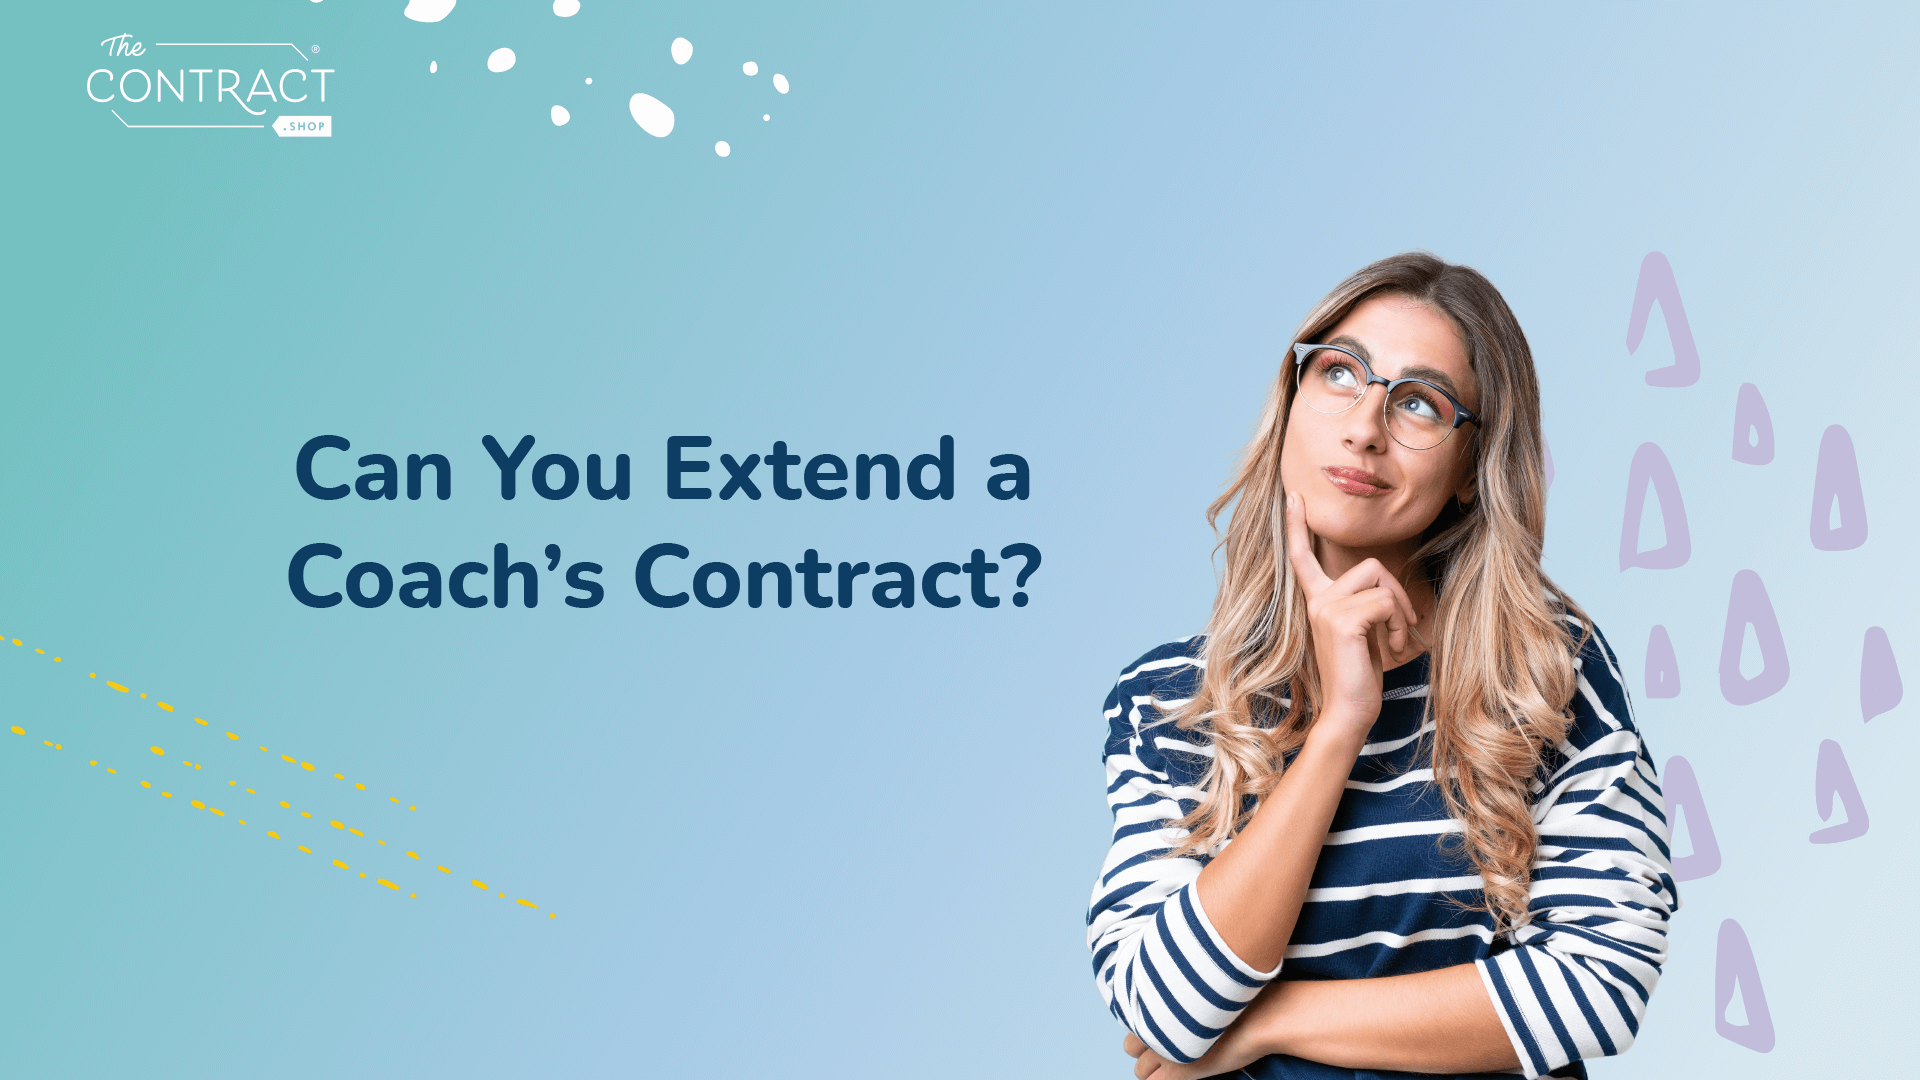 Can You Extend a Coach's Contract?